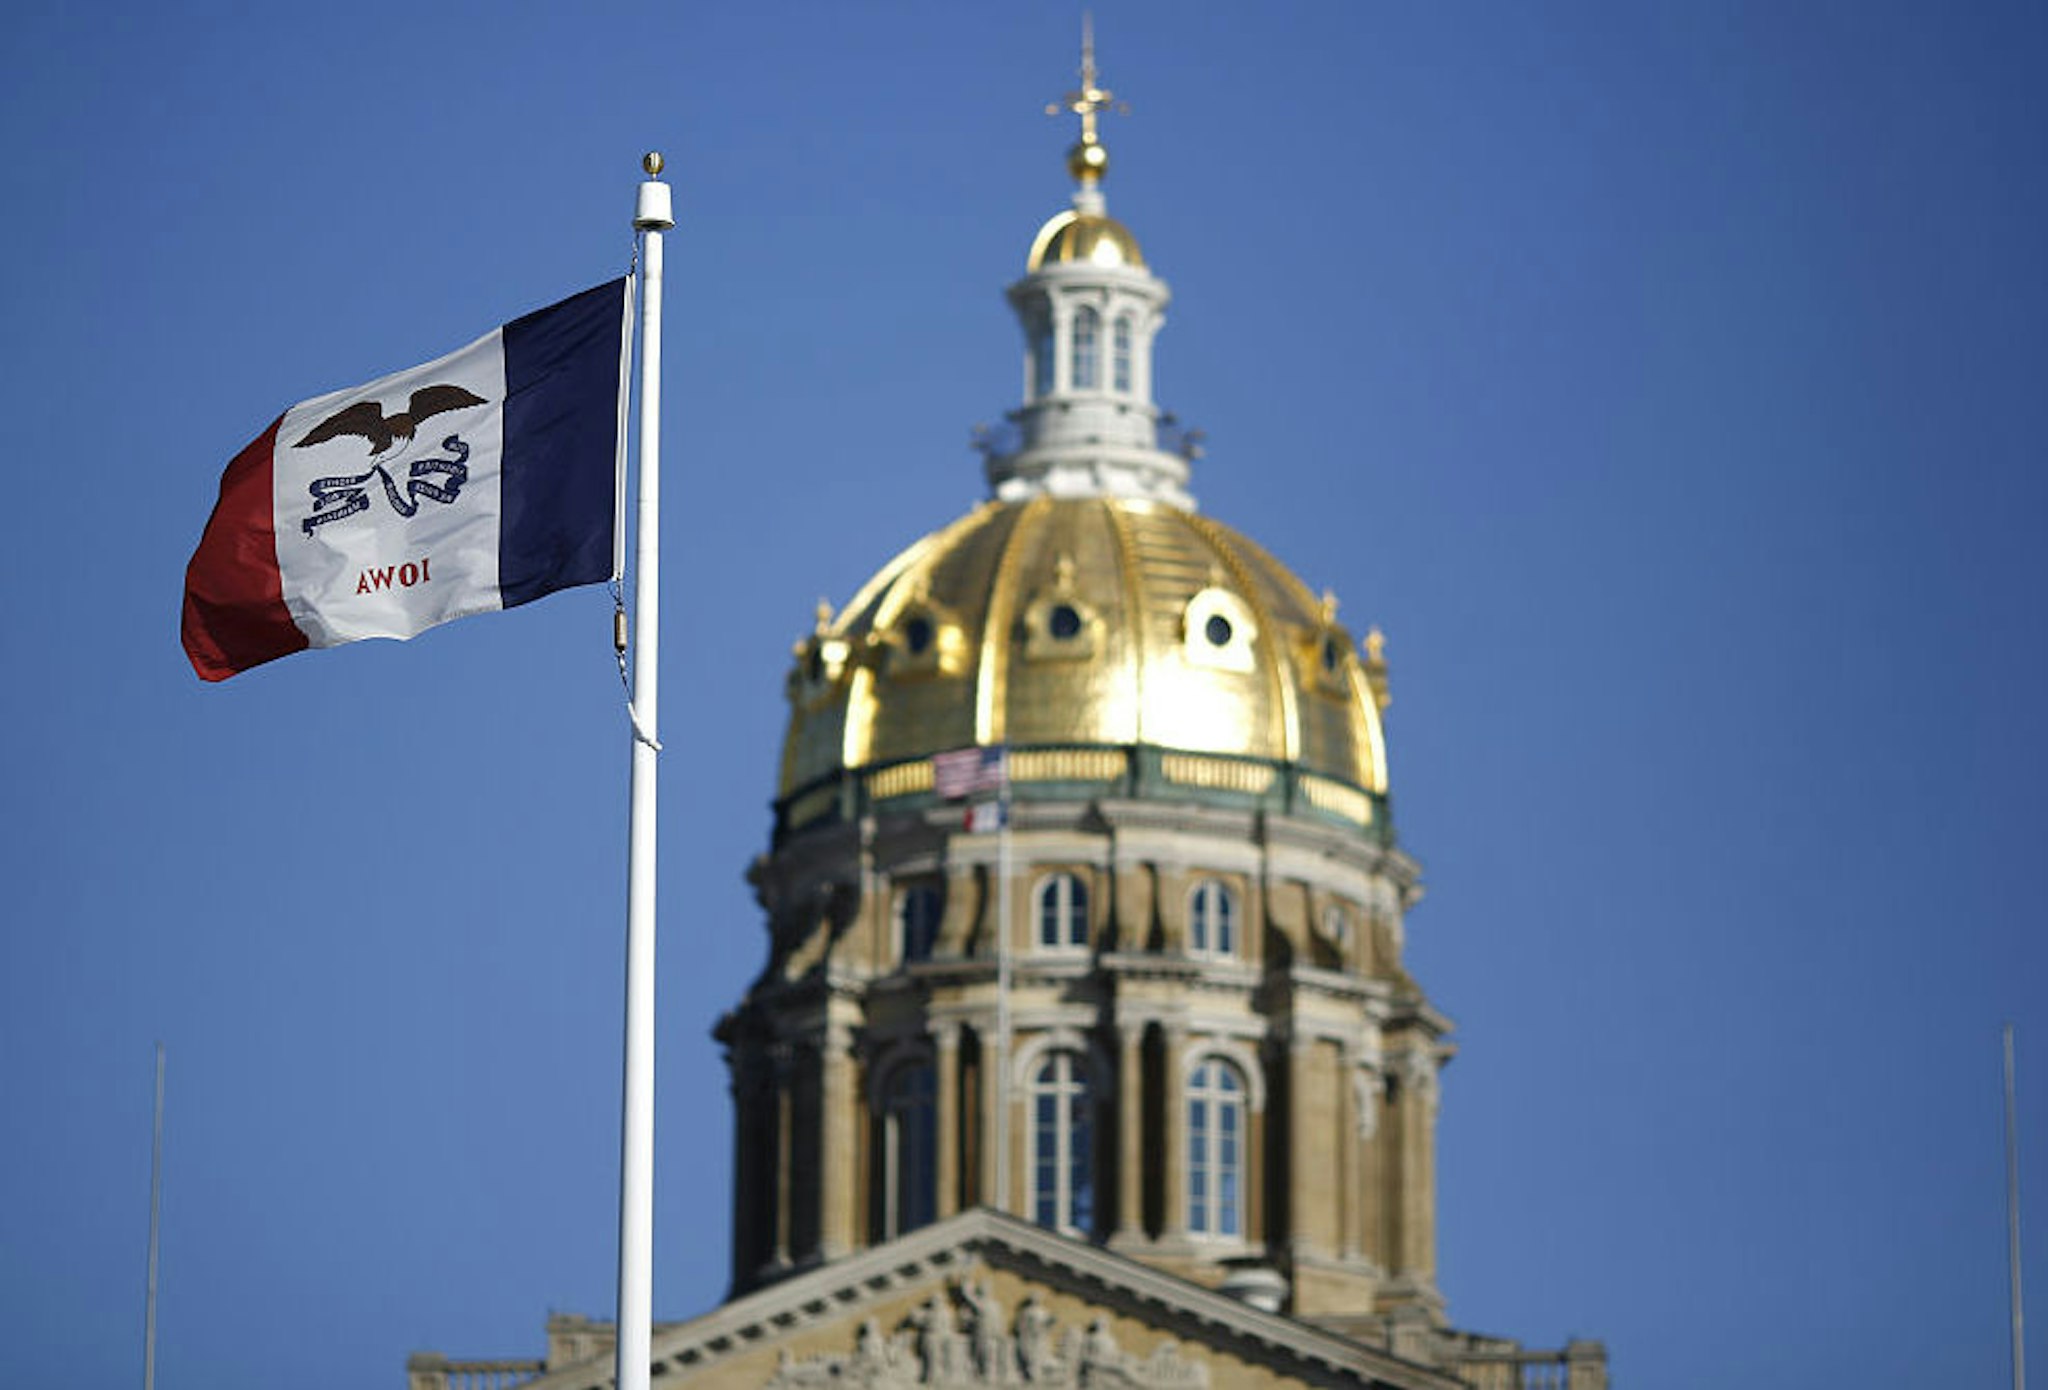 The Iowa state flag flies outside the State Capitol Building in Des Moines, Iowa, U.S., on Friday, Jan. 29, 2016. As the first in the nation Iowa caucuses approaches, where registering your vote isn't as simple as casting a ballot, the state is starting to thrum with nervous energy.